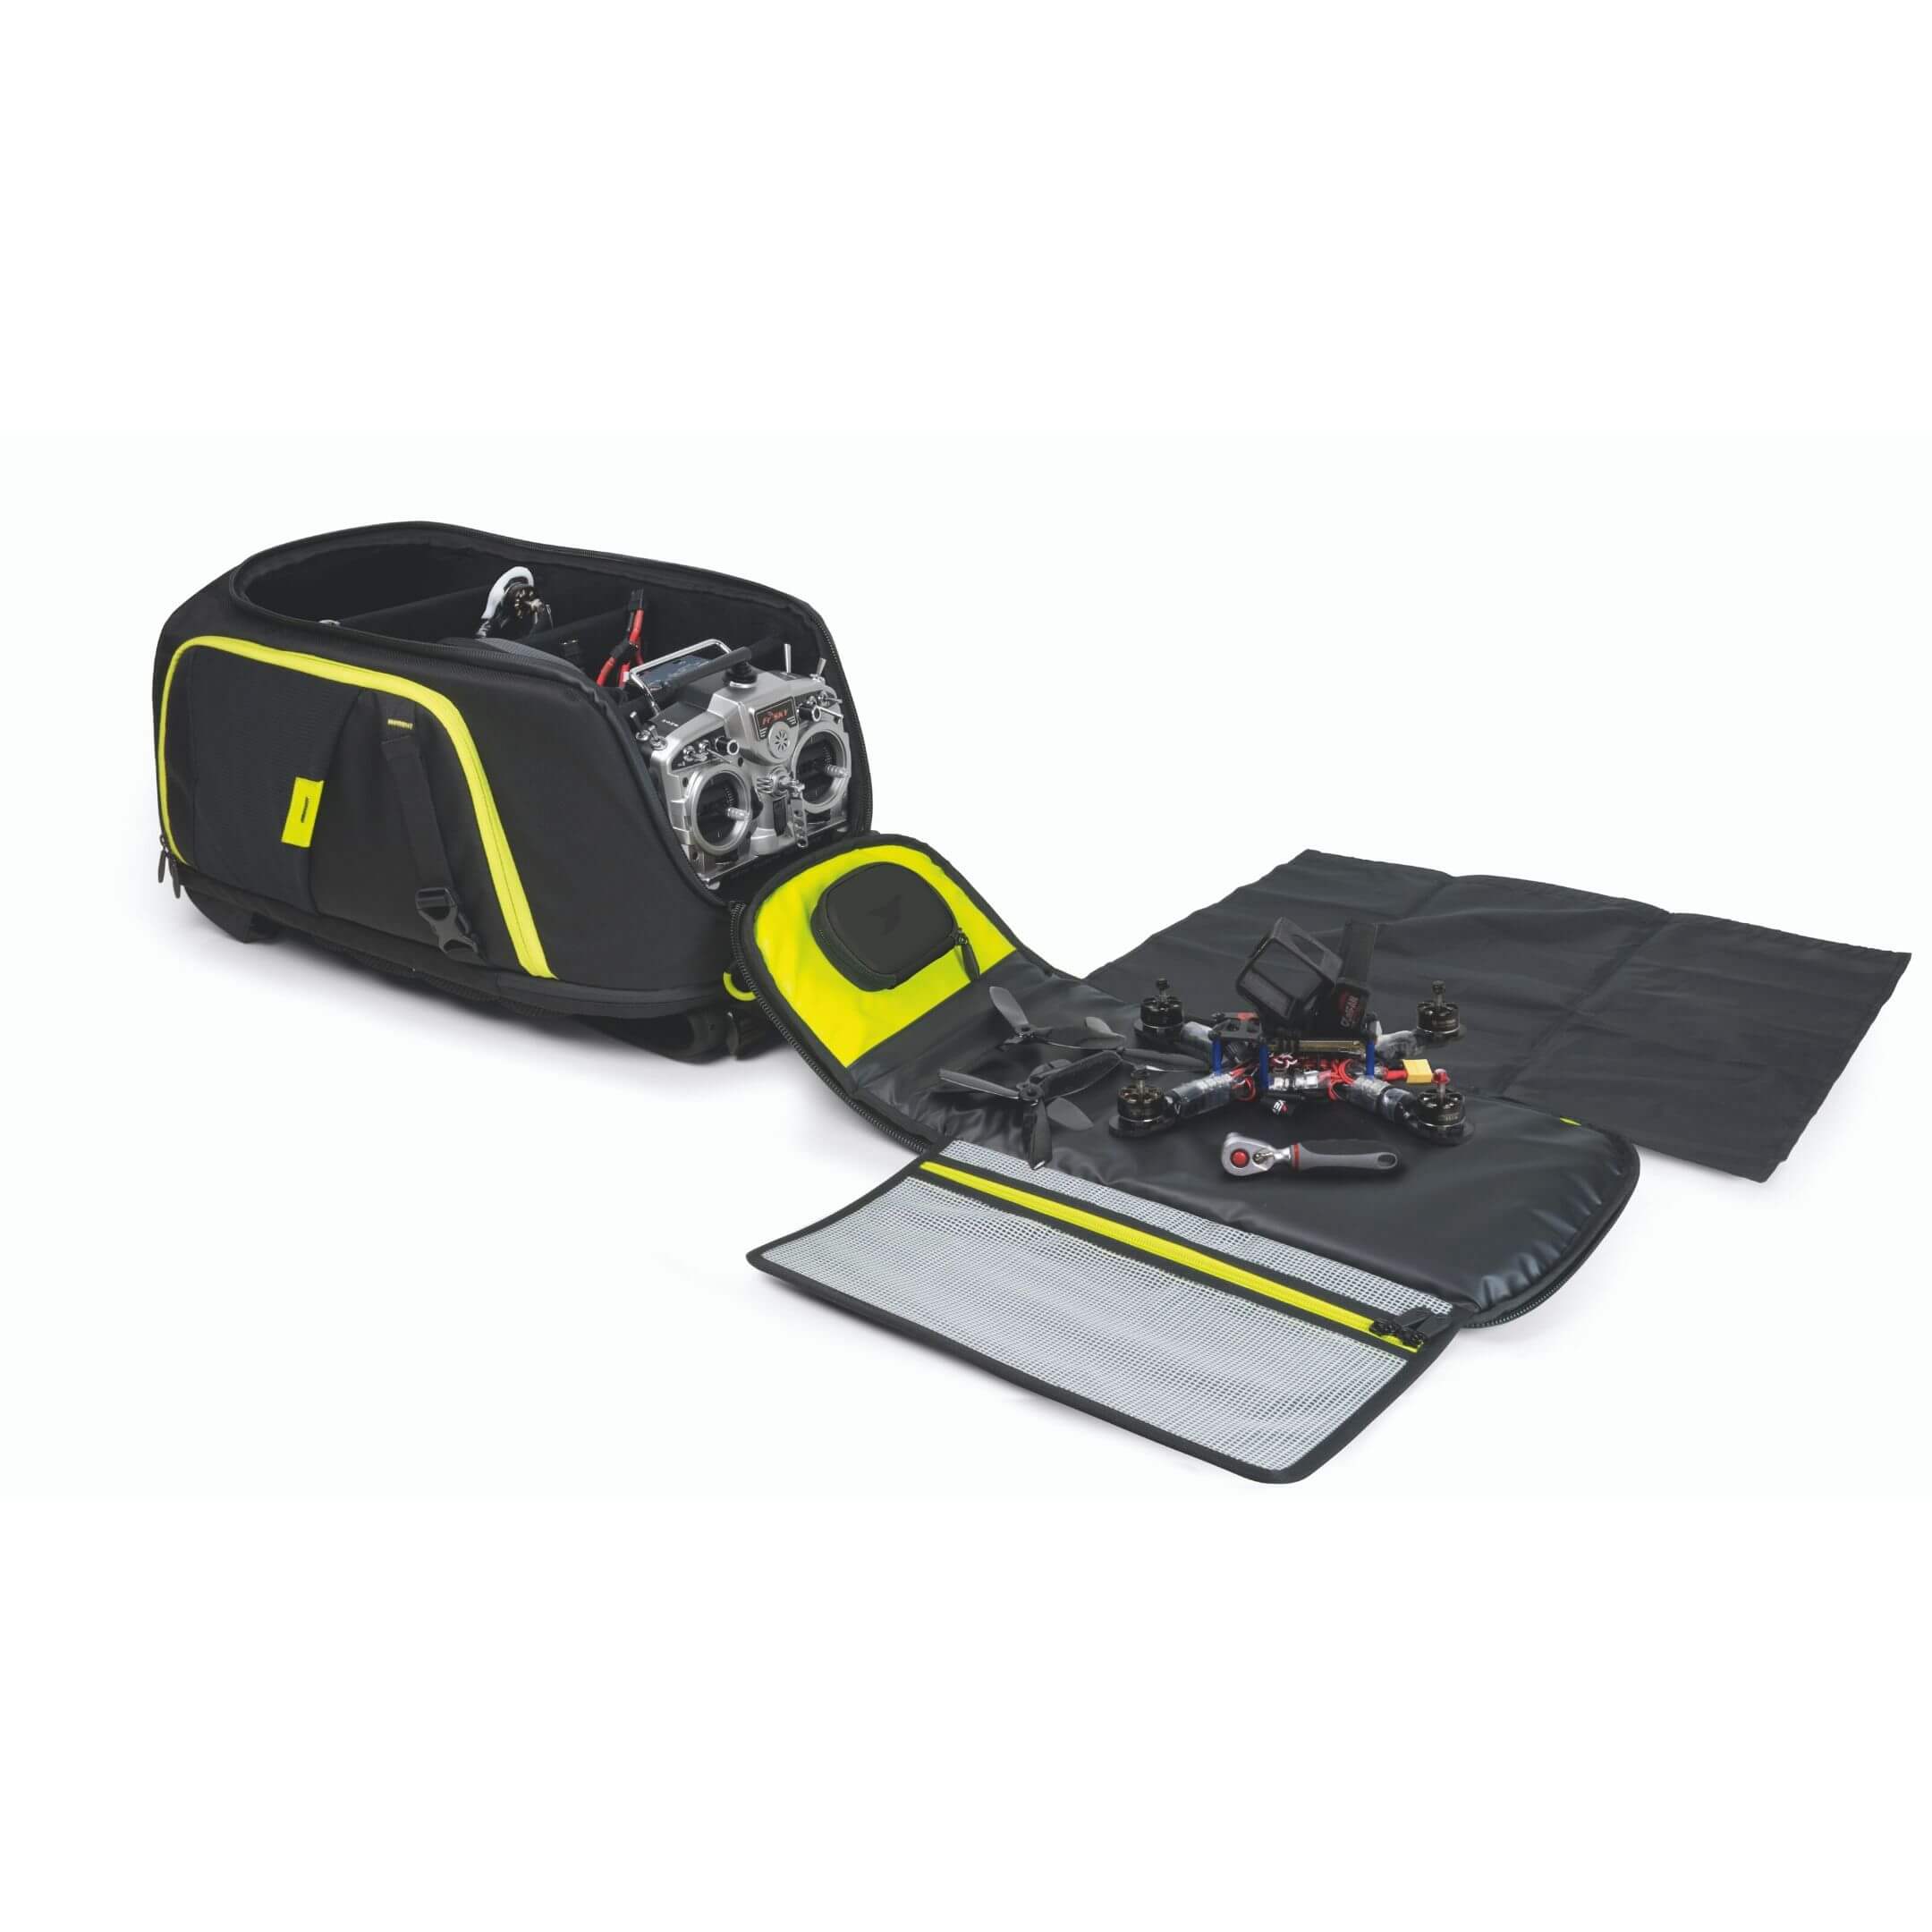 Torvol-Quad-Pitstop-Backpack-Pro-pitstop-area-and-clean-seat-open